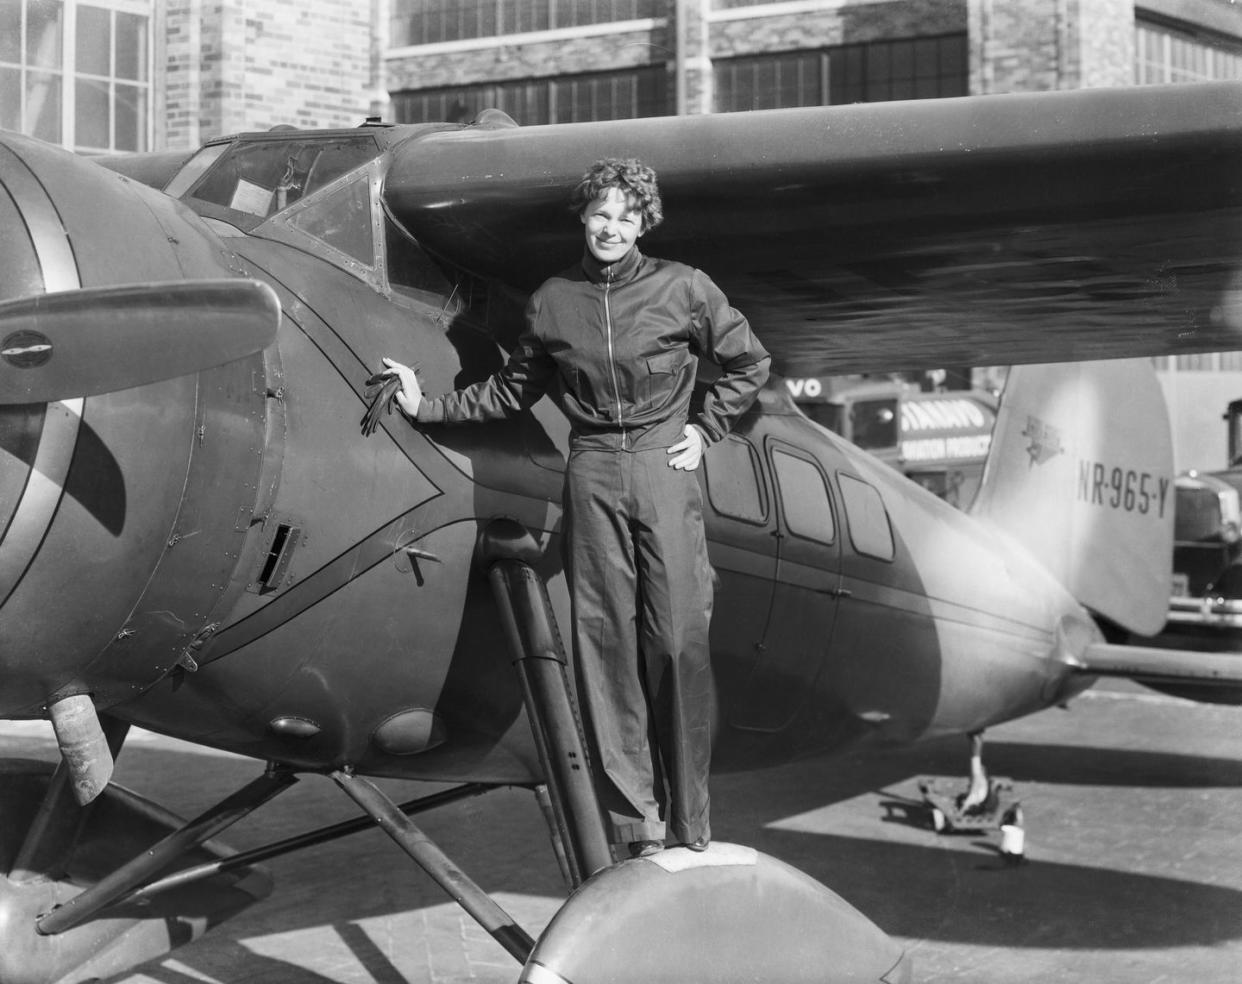 amelia earhart next to aircraft